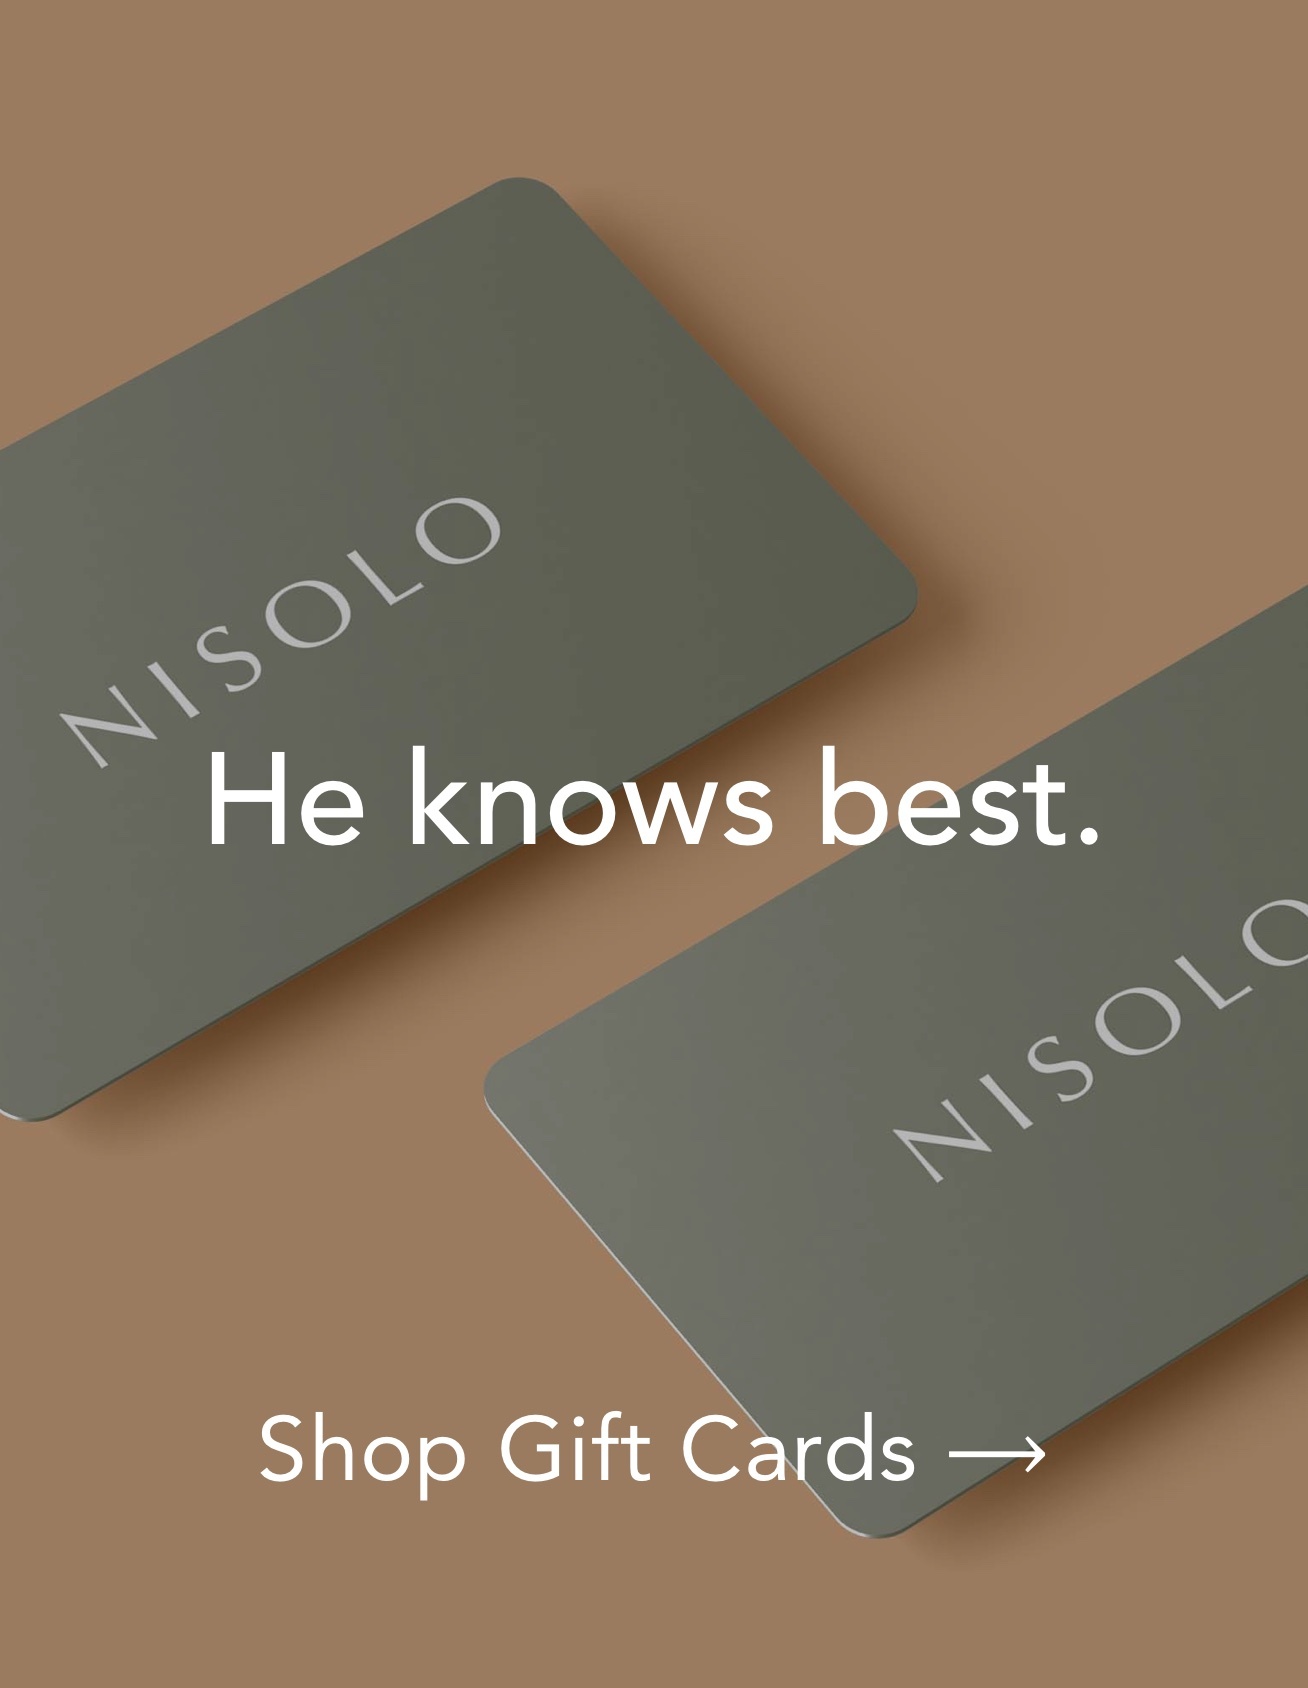 Click here to purchase a gift card